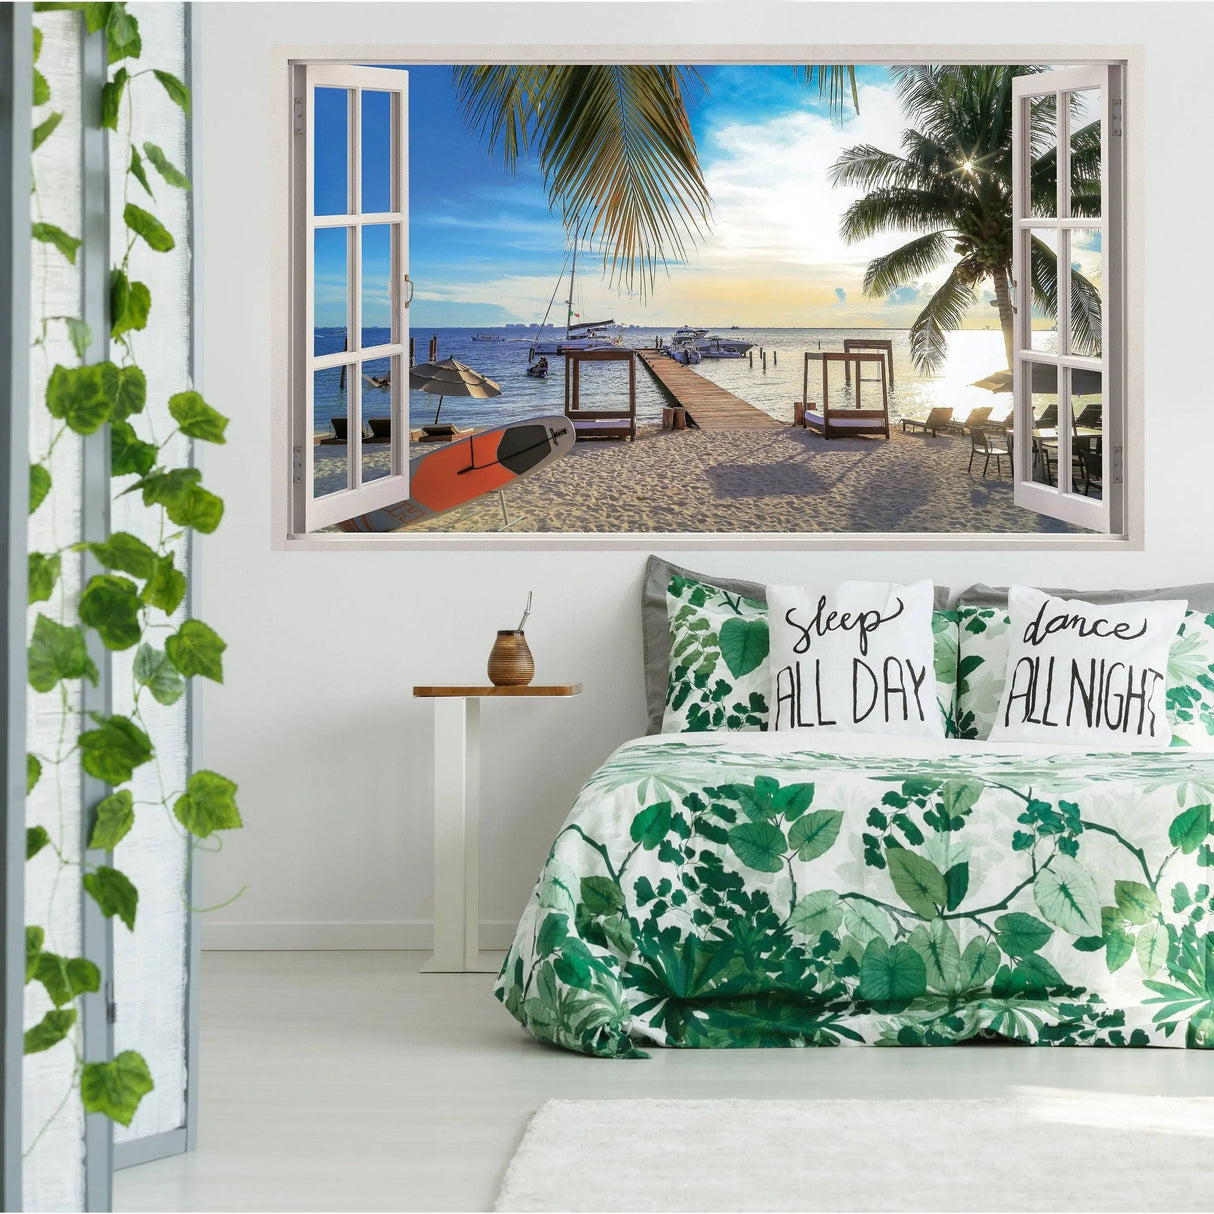 Tropical Paradise Wall Sticker, Window Decal for Interior Decorations